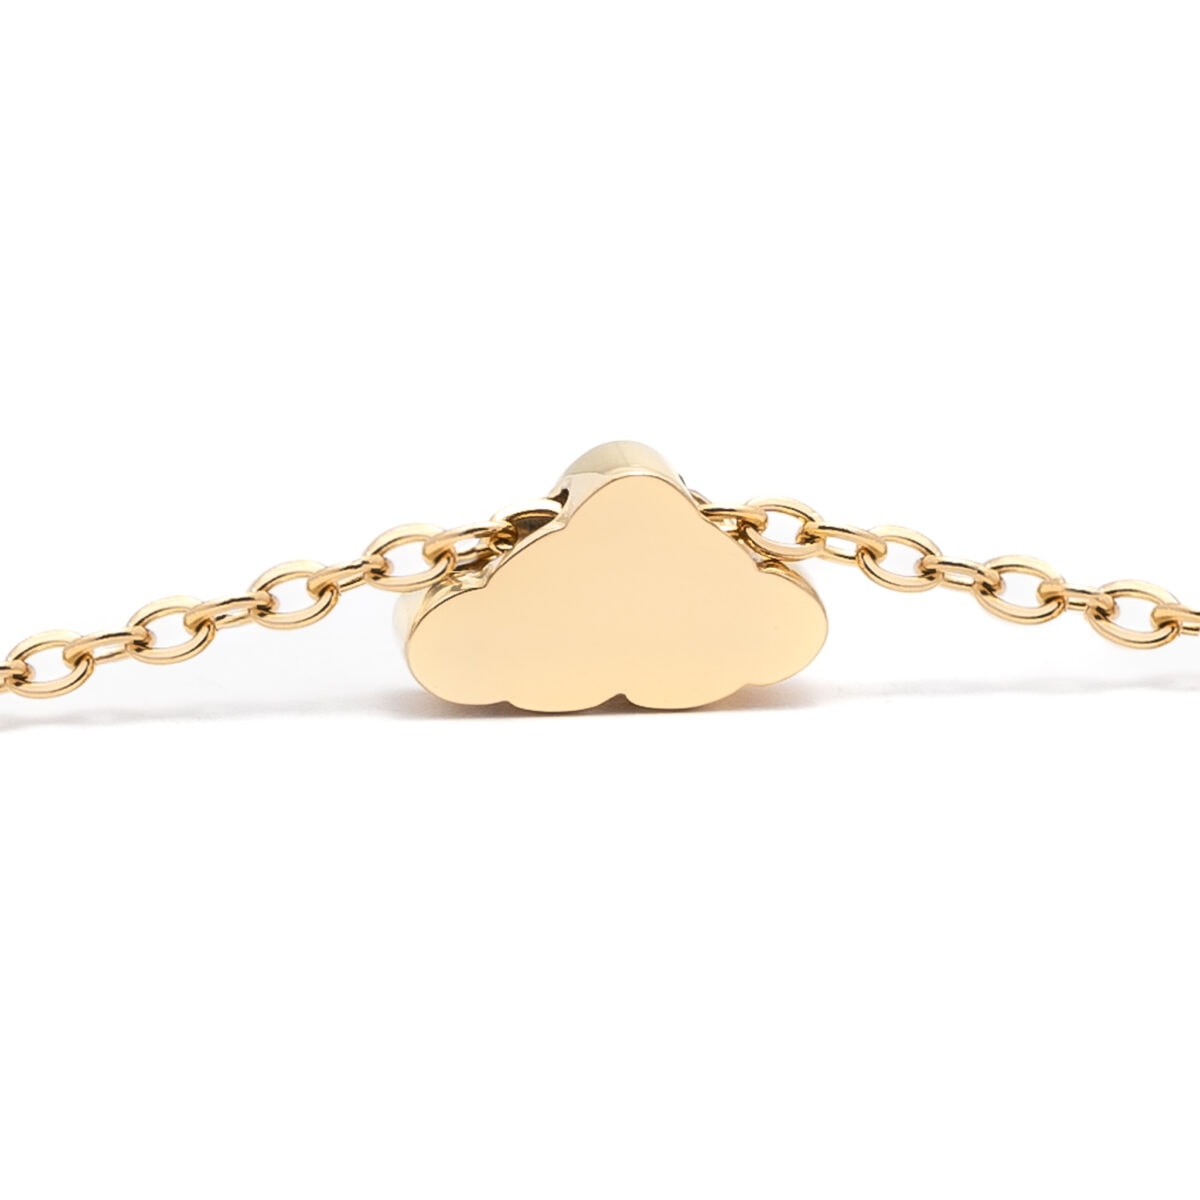 https://m.clubbella.co/product/volare-cloud-gold-charm-necklace/ Volare Cloud Gold Charm (3)